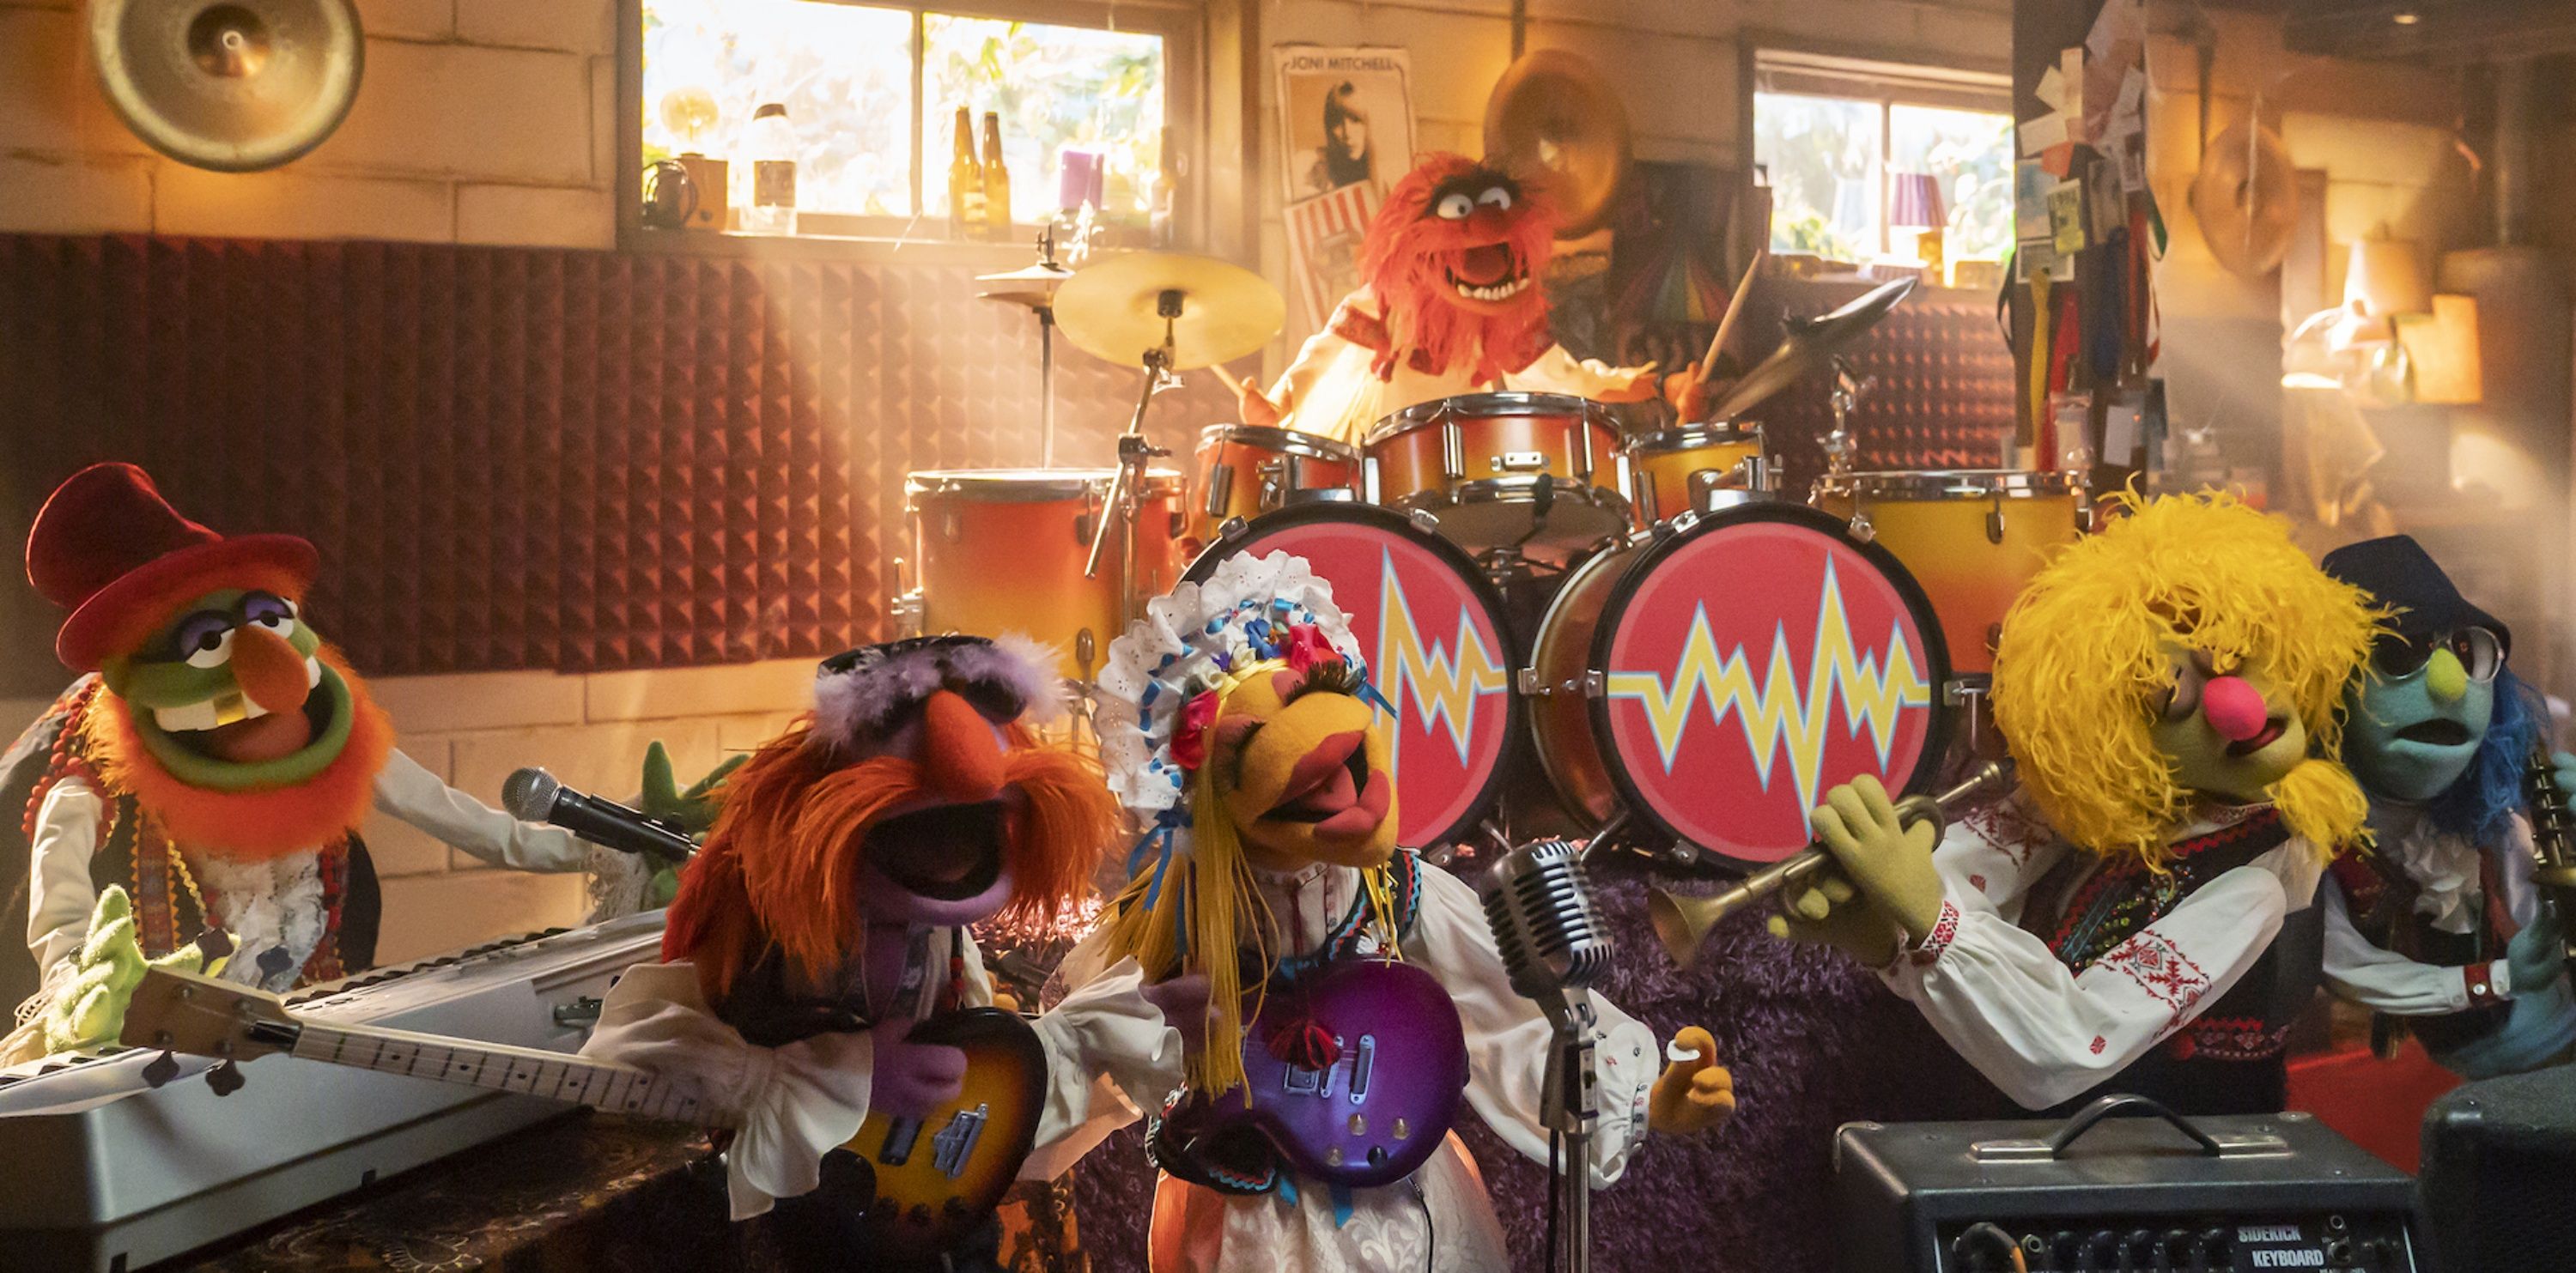 The Electric Mayhem, featuring Dr. Teeth, Floyd Pepper, Janice, Animal, Lips and Zoot, in The Muppets Mayhem